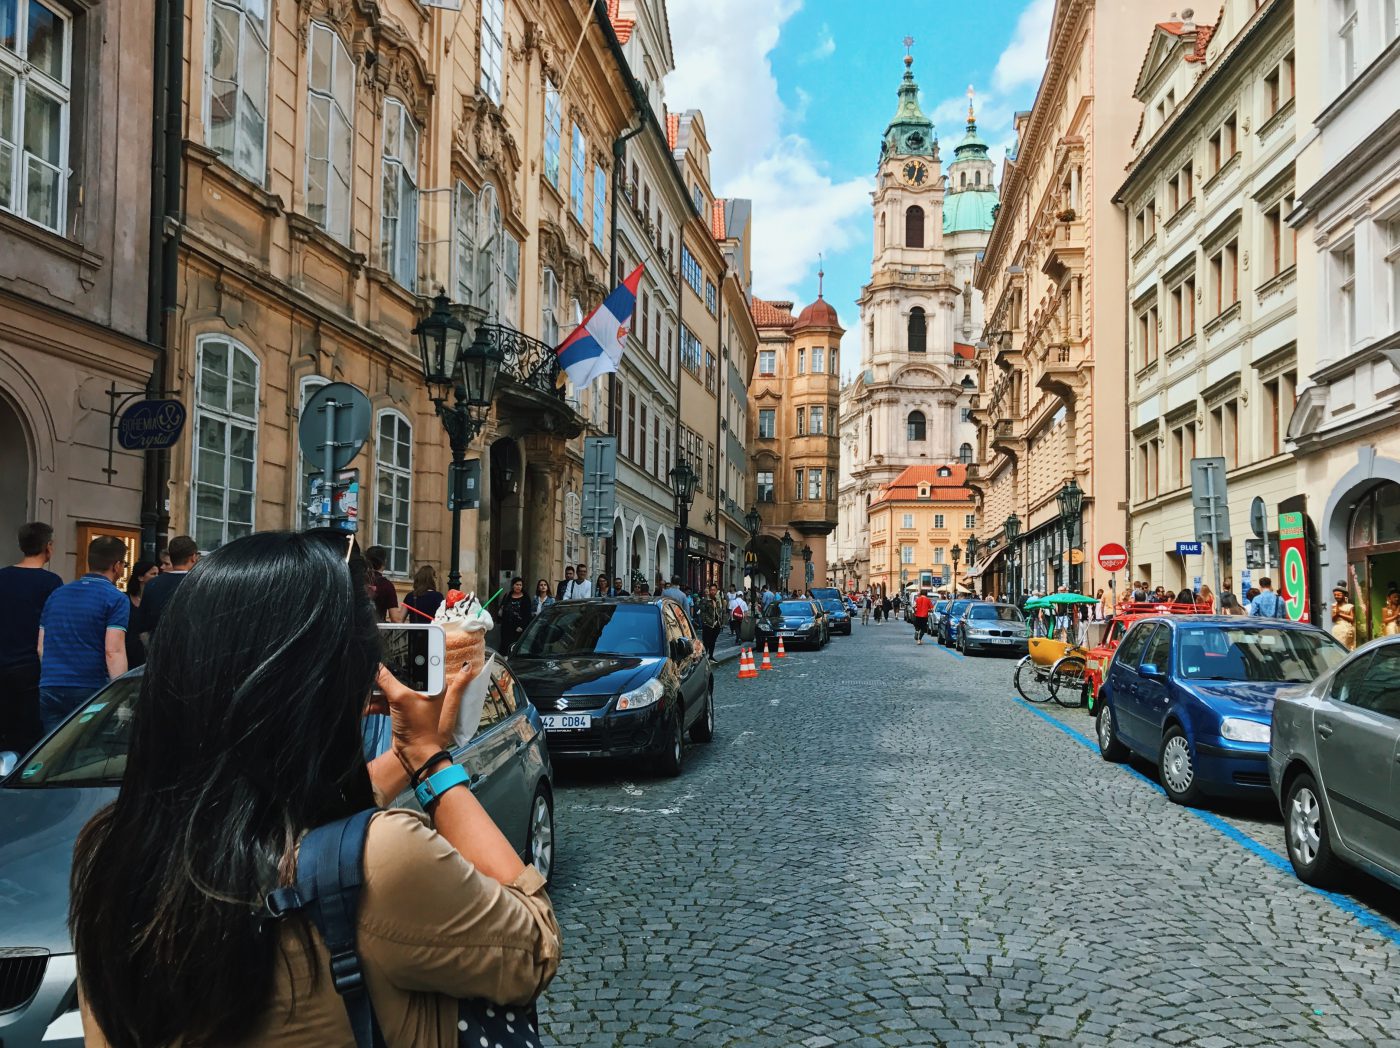 Me, taking a photo in Old Town Prague and trying not to get hit by traffic.